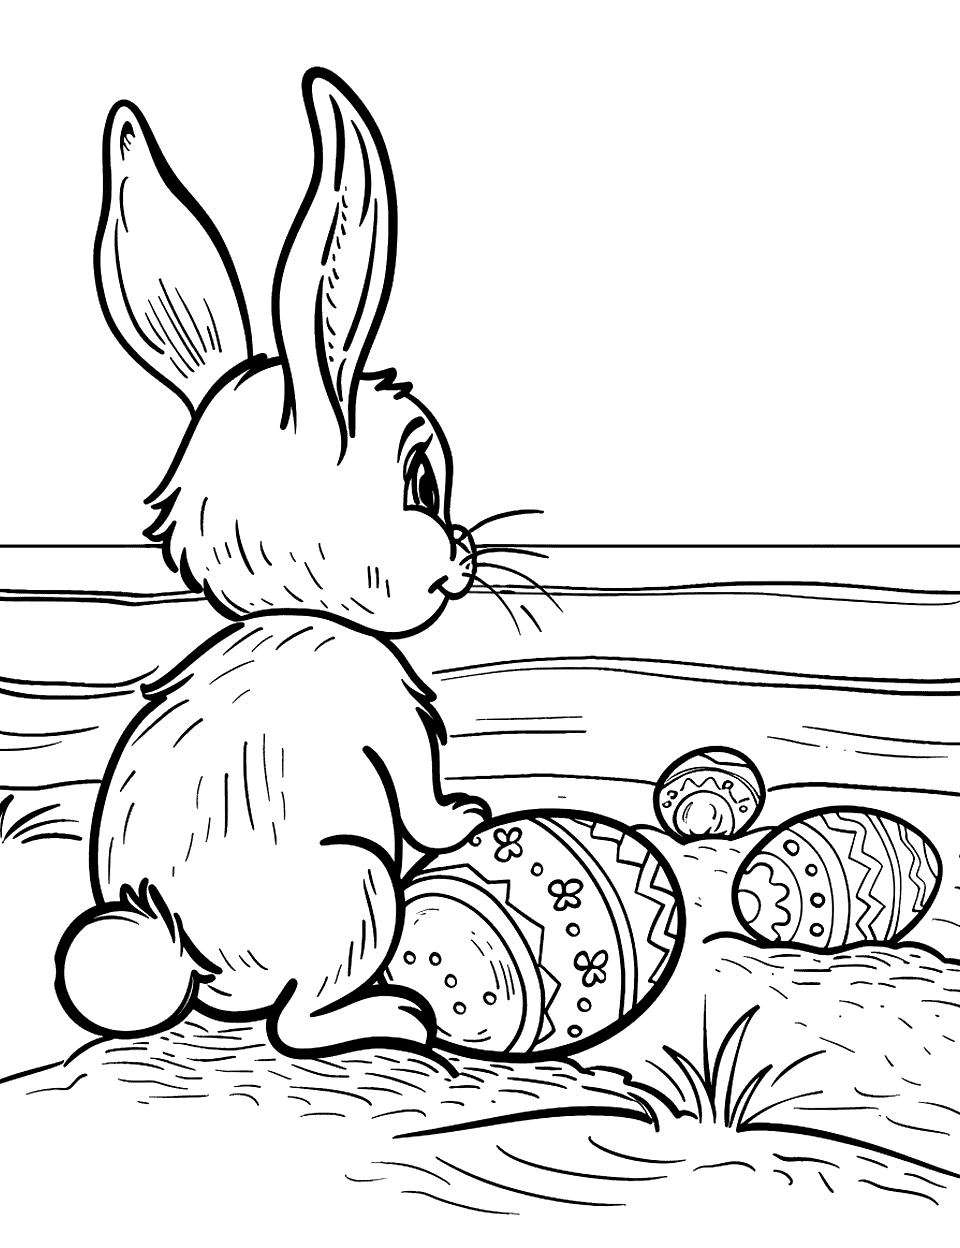 Seaside Easter Adventure Bunny Coloring Page - A bunny standing on a sandy beach looking at the sea, with a few Easter eggs scattered in the sand.